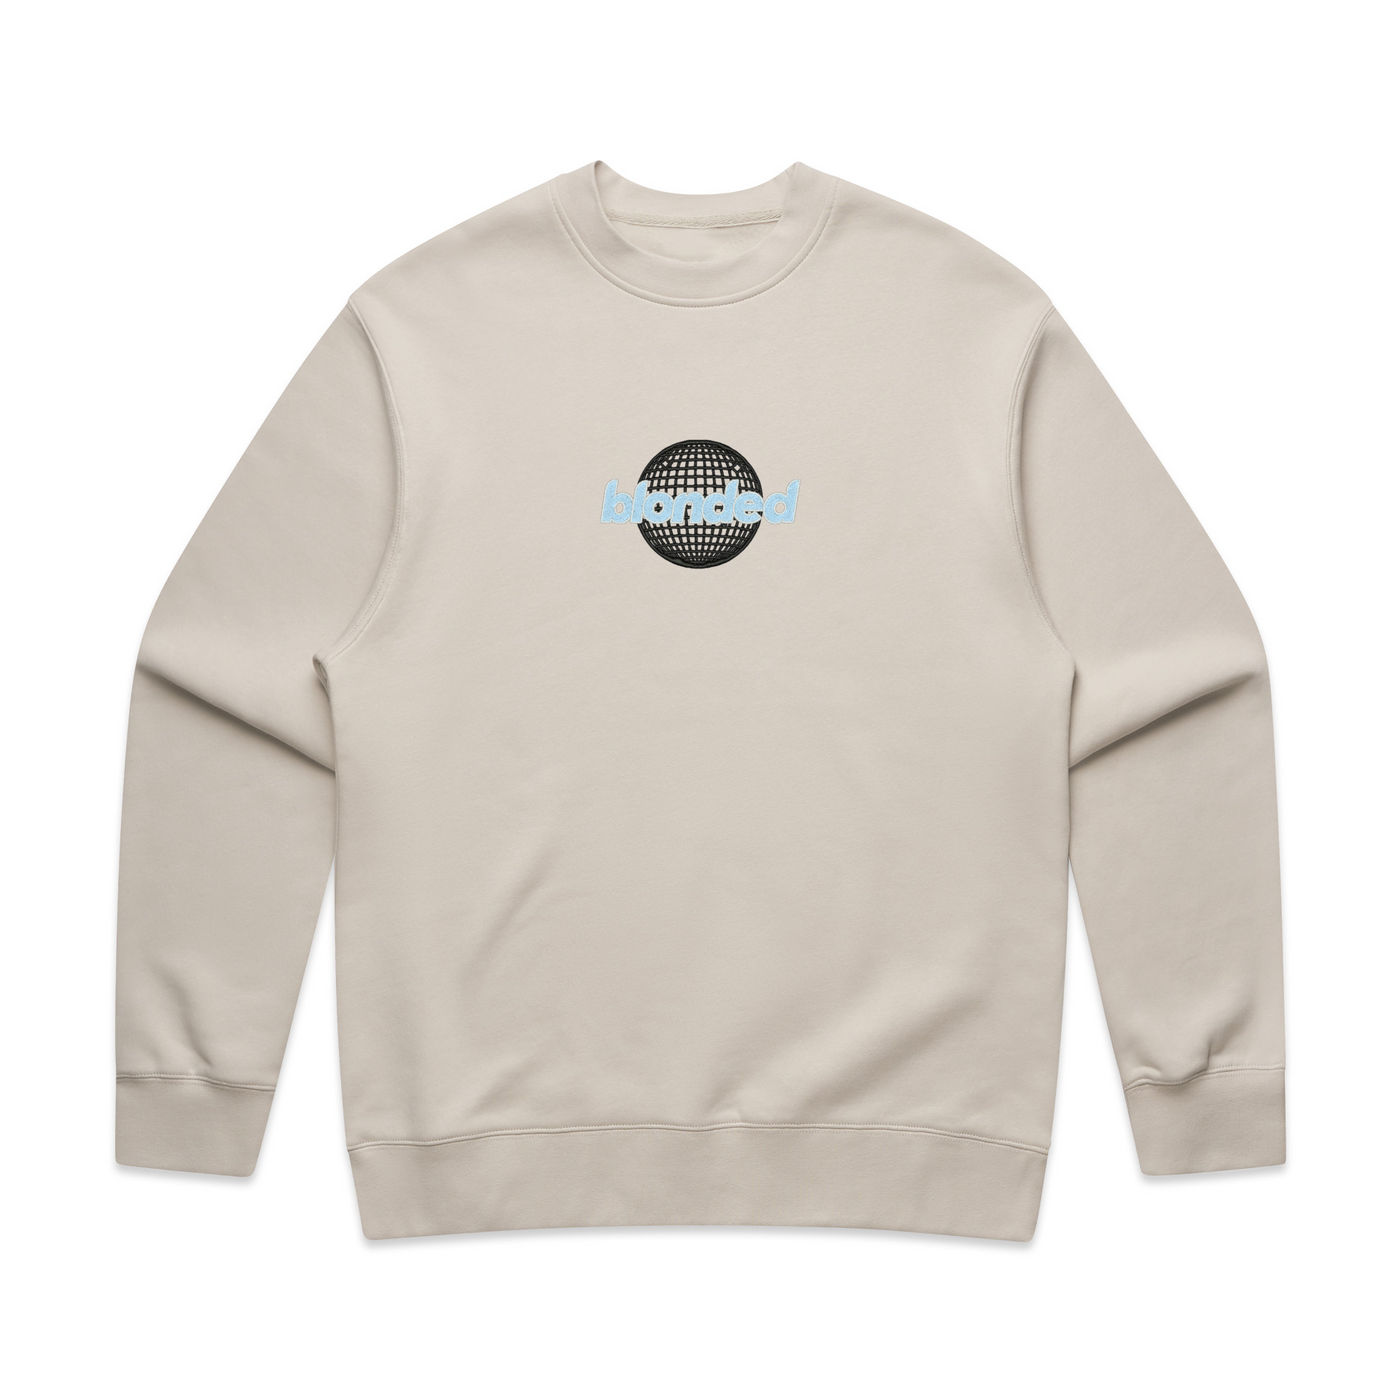 Embroidered Blonded Globe Crewneck